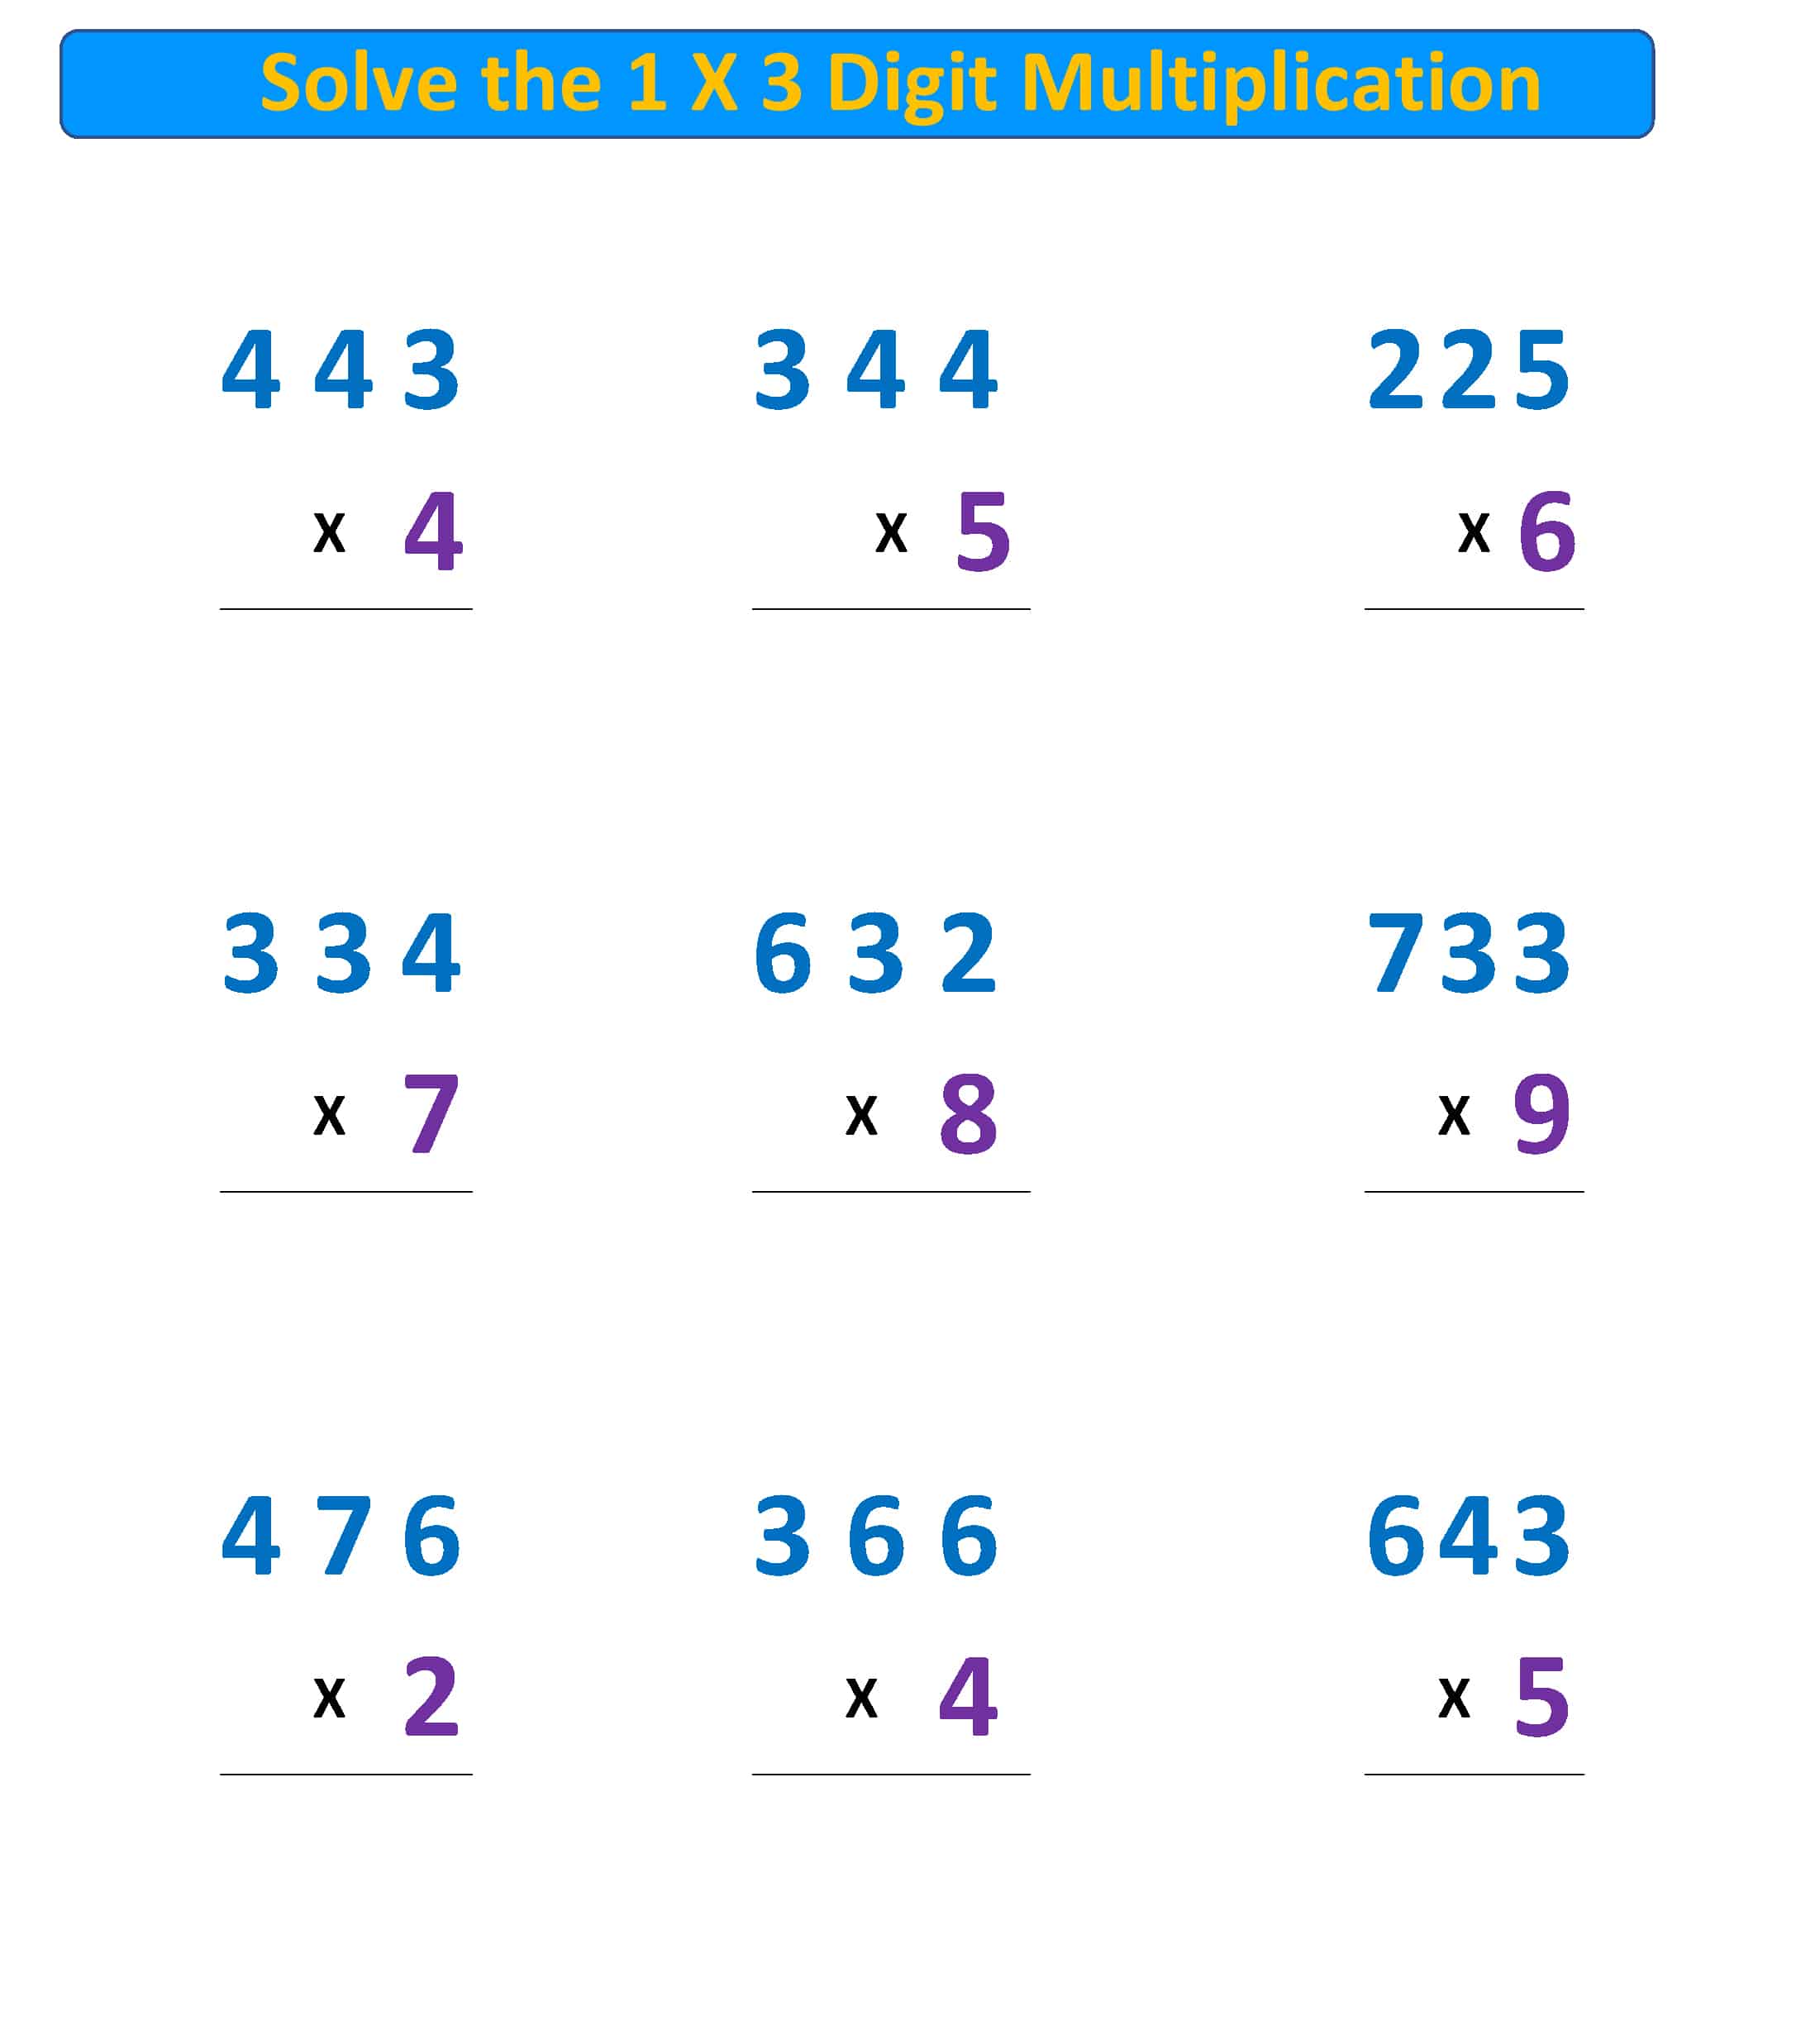 Multiplication Problems 1 X 3 Digit Regroup Tens And Hundreds Mr R s World Of Math